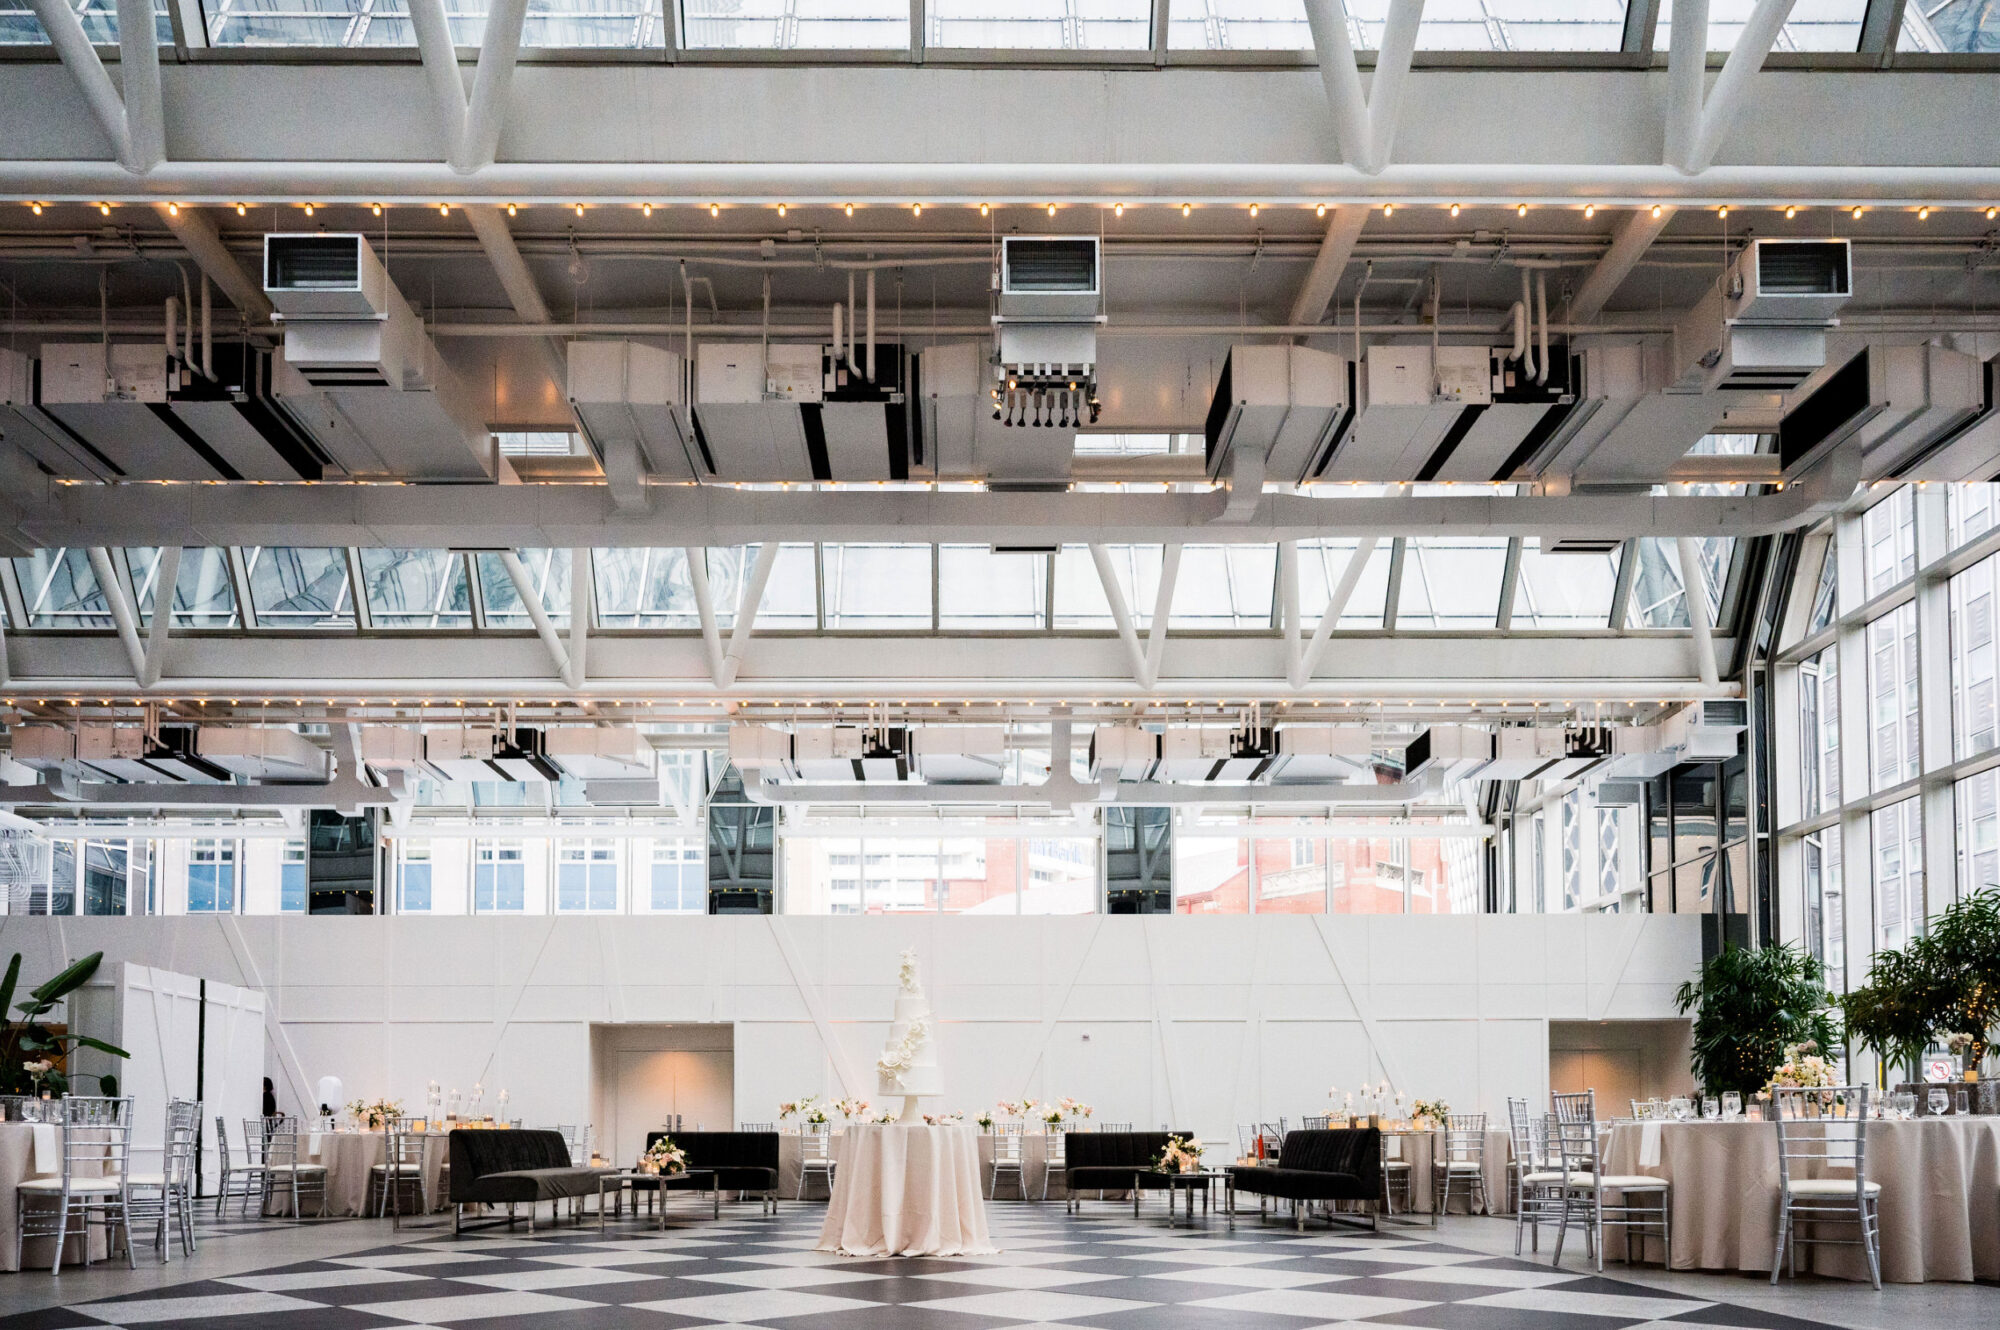 wedding reception space at ppg wintergarden in pittsburgh downtown • PPG Wintergarden Weddings: Modern Glass-Walled Pittsburgh Receptions You'll Love!